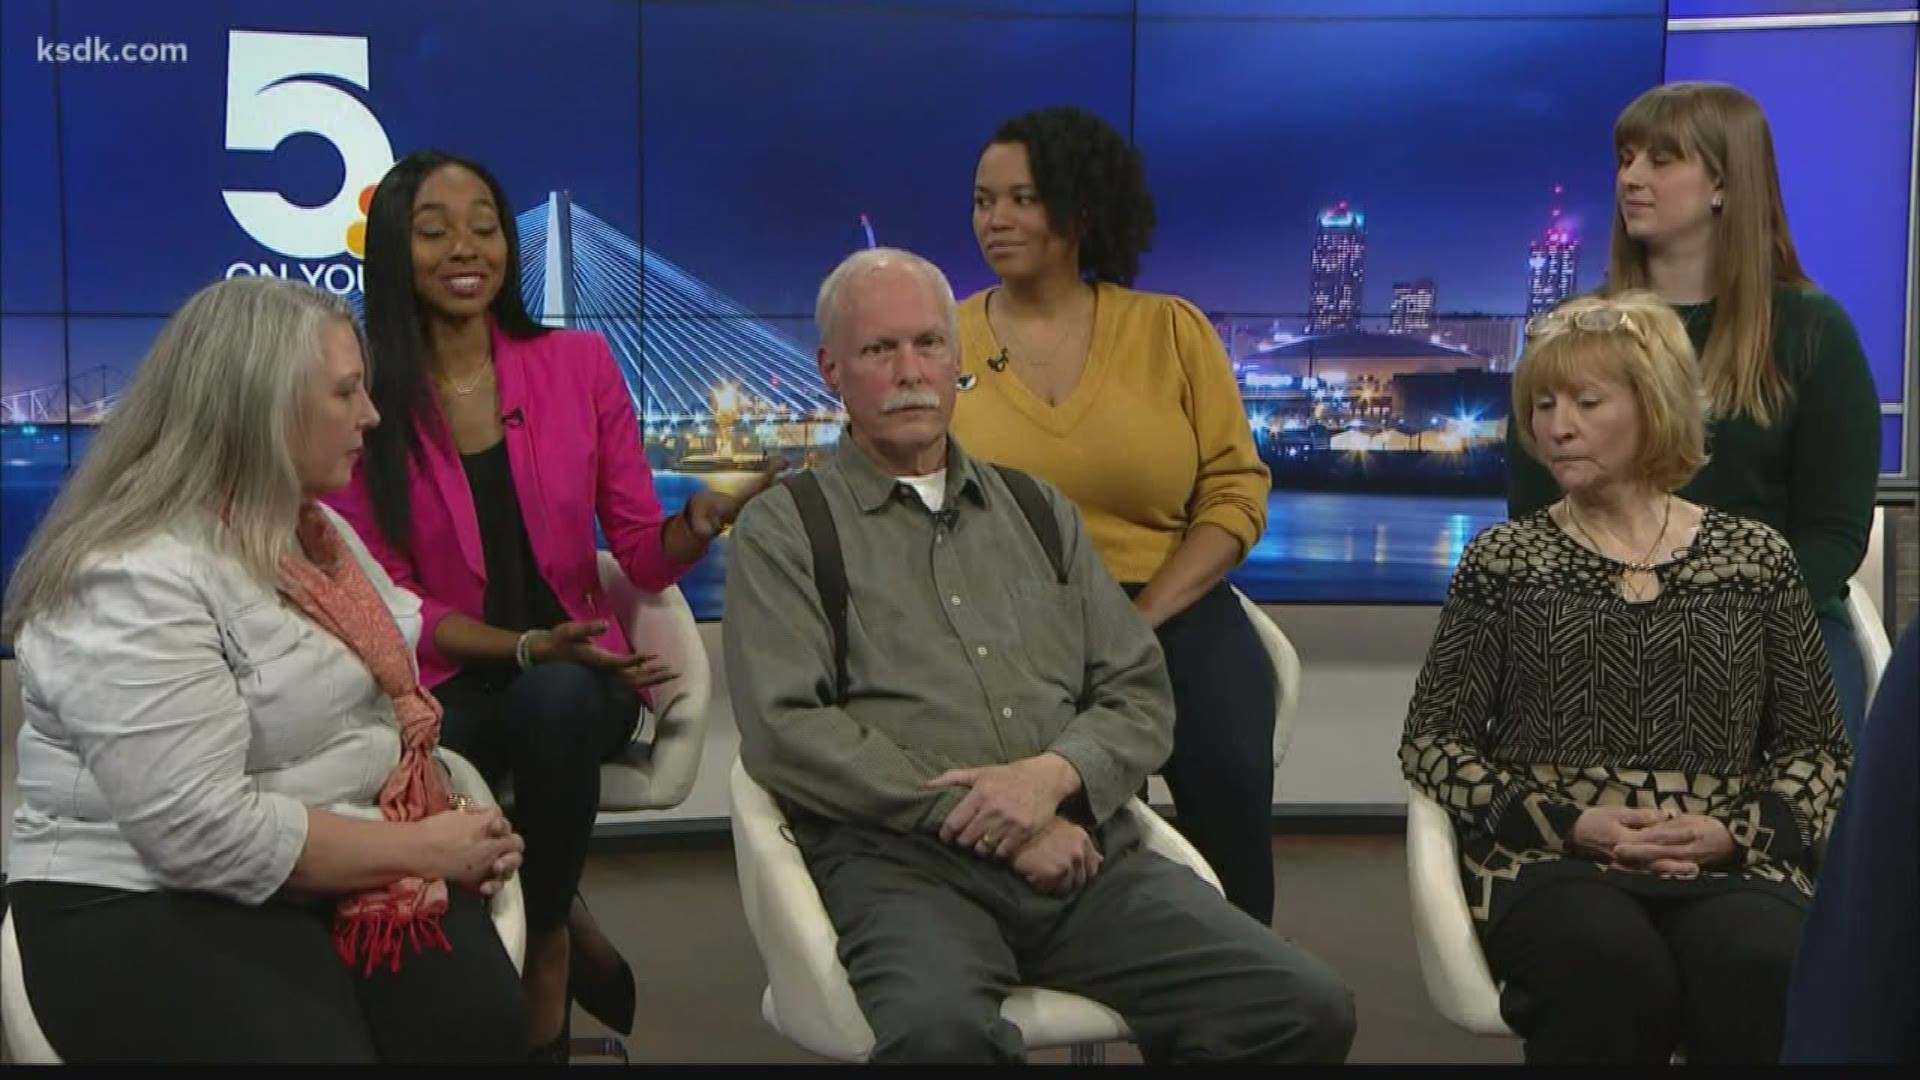 5 On Your Side got a panel of boomers and millennials together to share their thoughts on the contentious relationship between the generations.